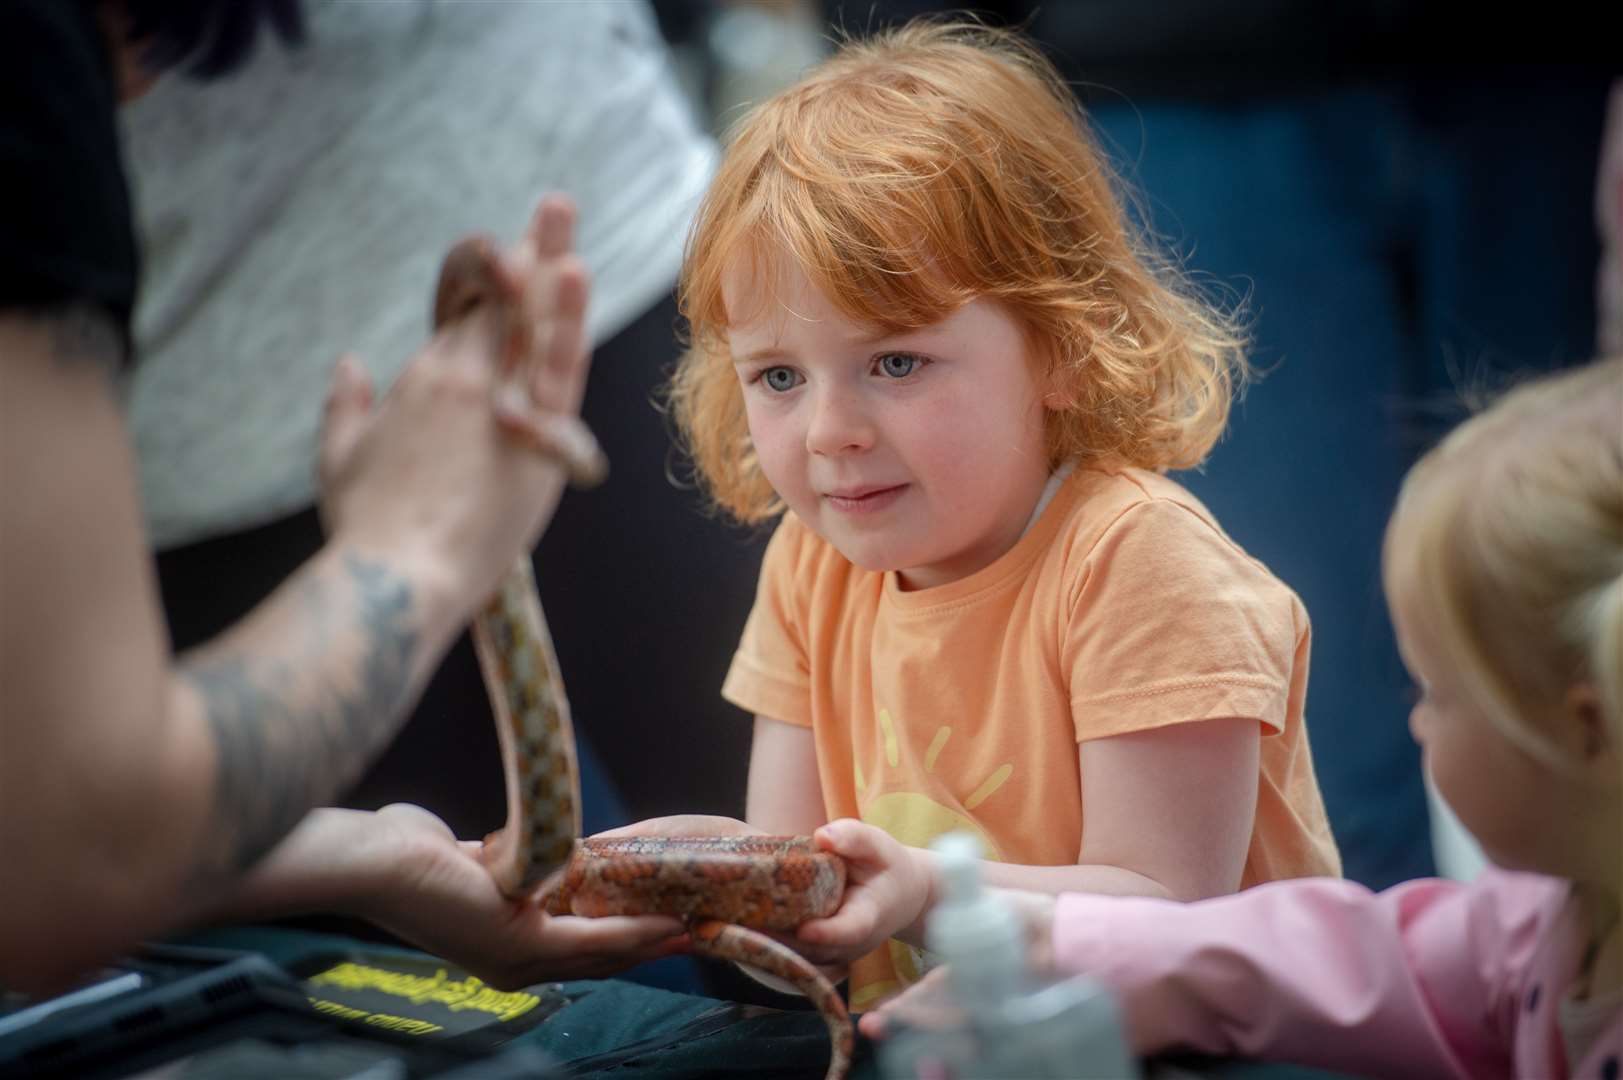 One youngster takes a cautious look at one of the visitors from Scottish Exotic Animal Rescue.